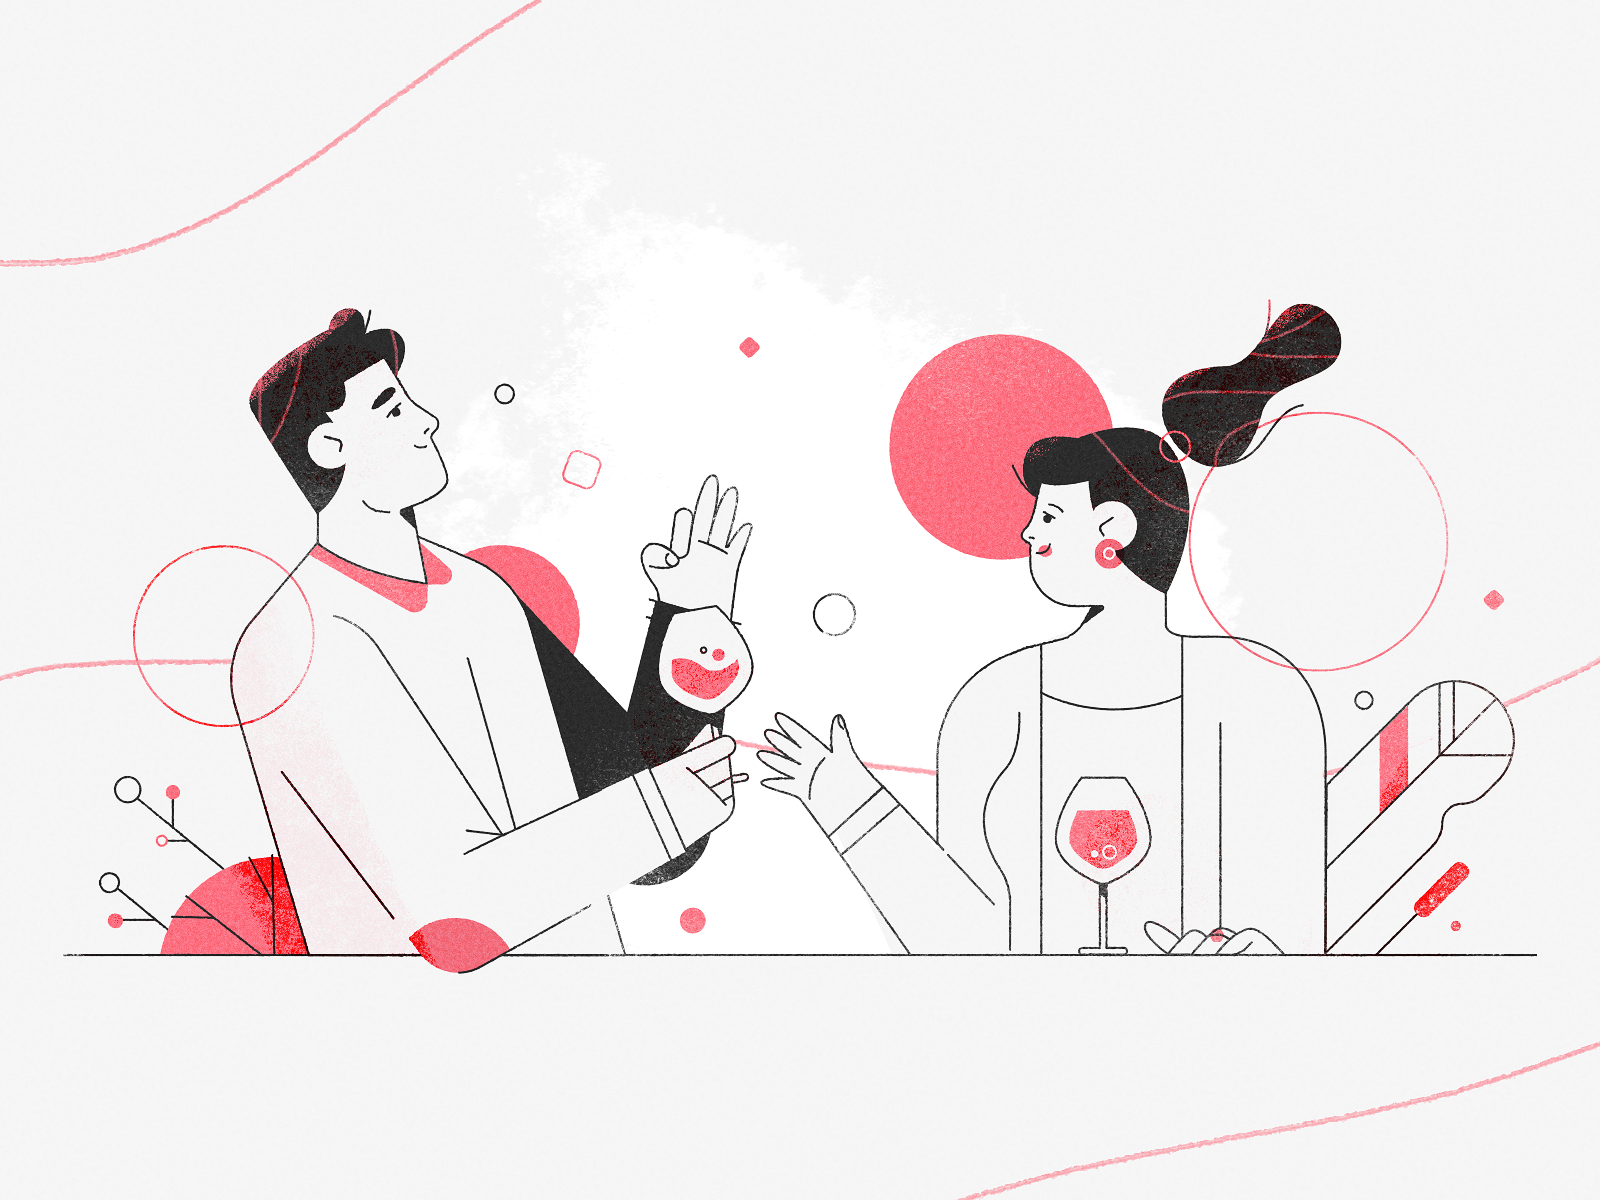 Connoisseurs by Mila Spasova on Dribbble